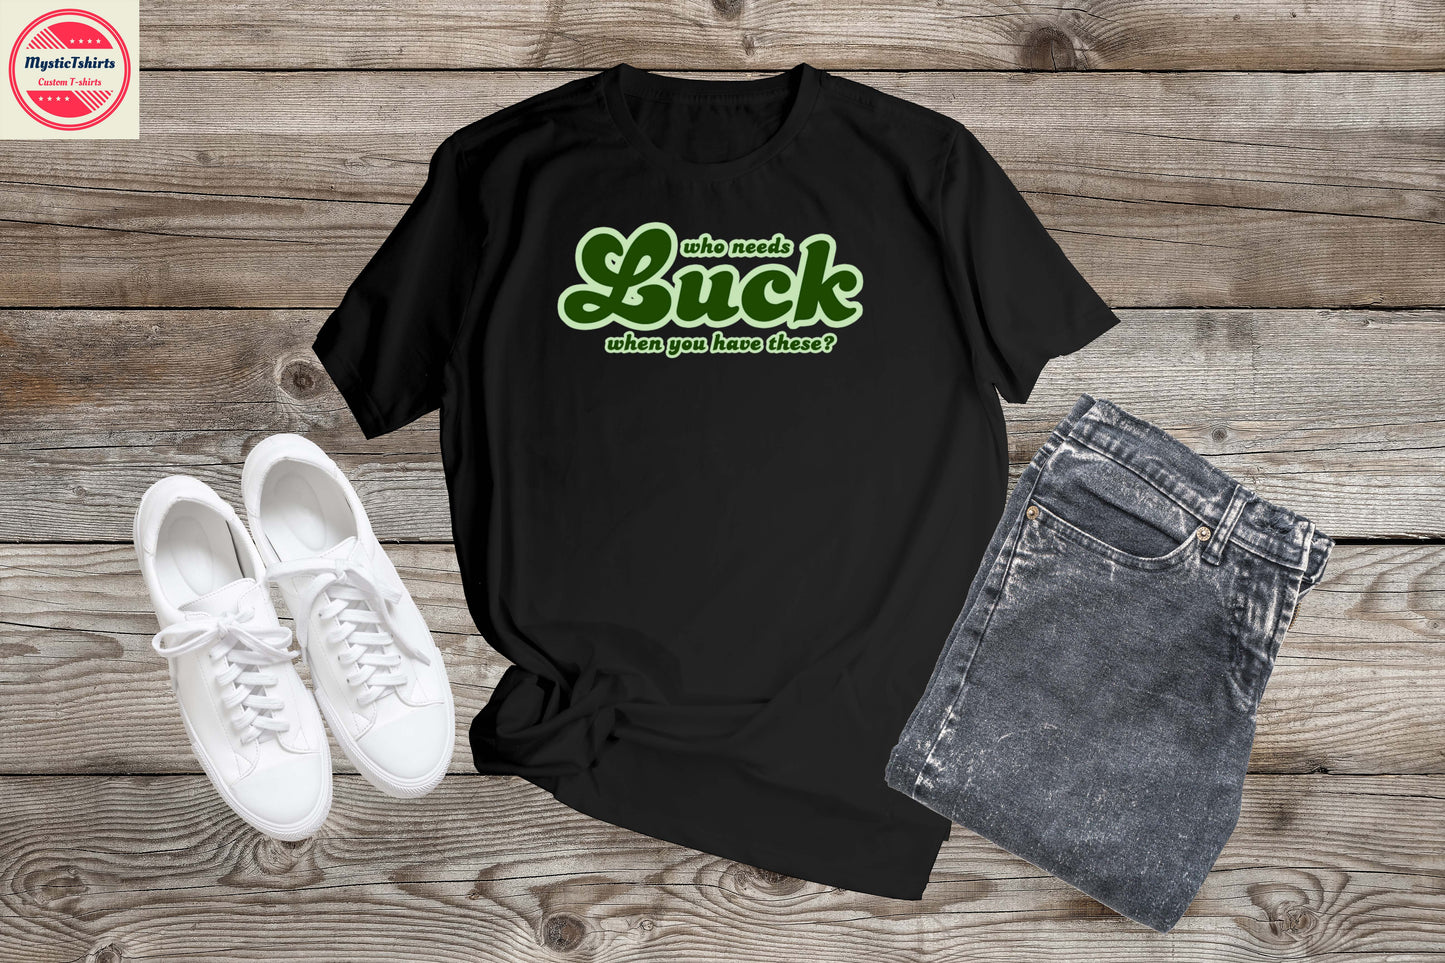 476. WHO NEEDS LUCK WHEN YOU HAVE THESE?, Custom Made Shirt, Personalized T-Shirt, Custom Text, Make Your Own Shirt, Custom Tee